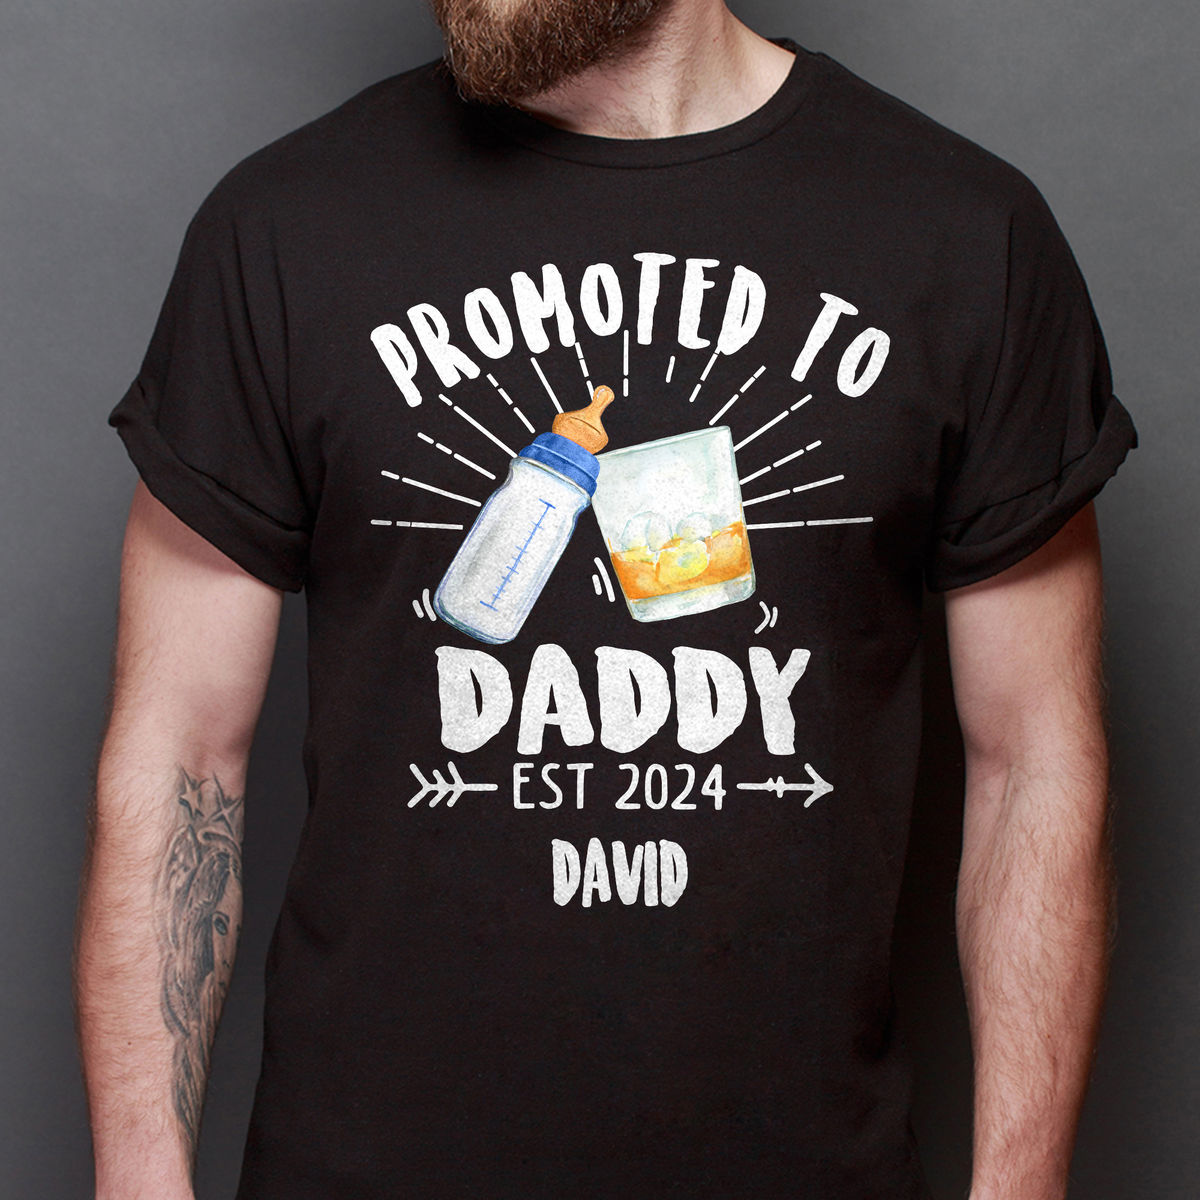 Personalized Shirt - Father's Day Gifts - Promoted To Daddy - Custom Drink For Dad, Mom, Baby - New Dad Gifts, Gifts For Dad - Father's Day Shirts